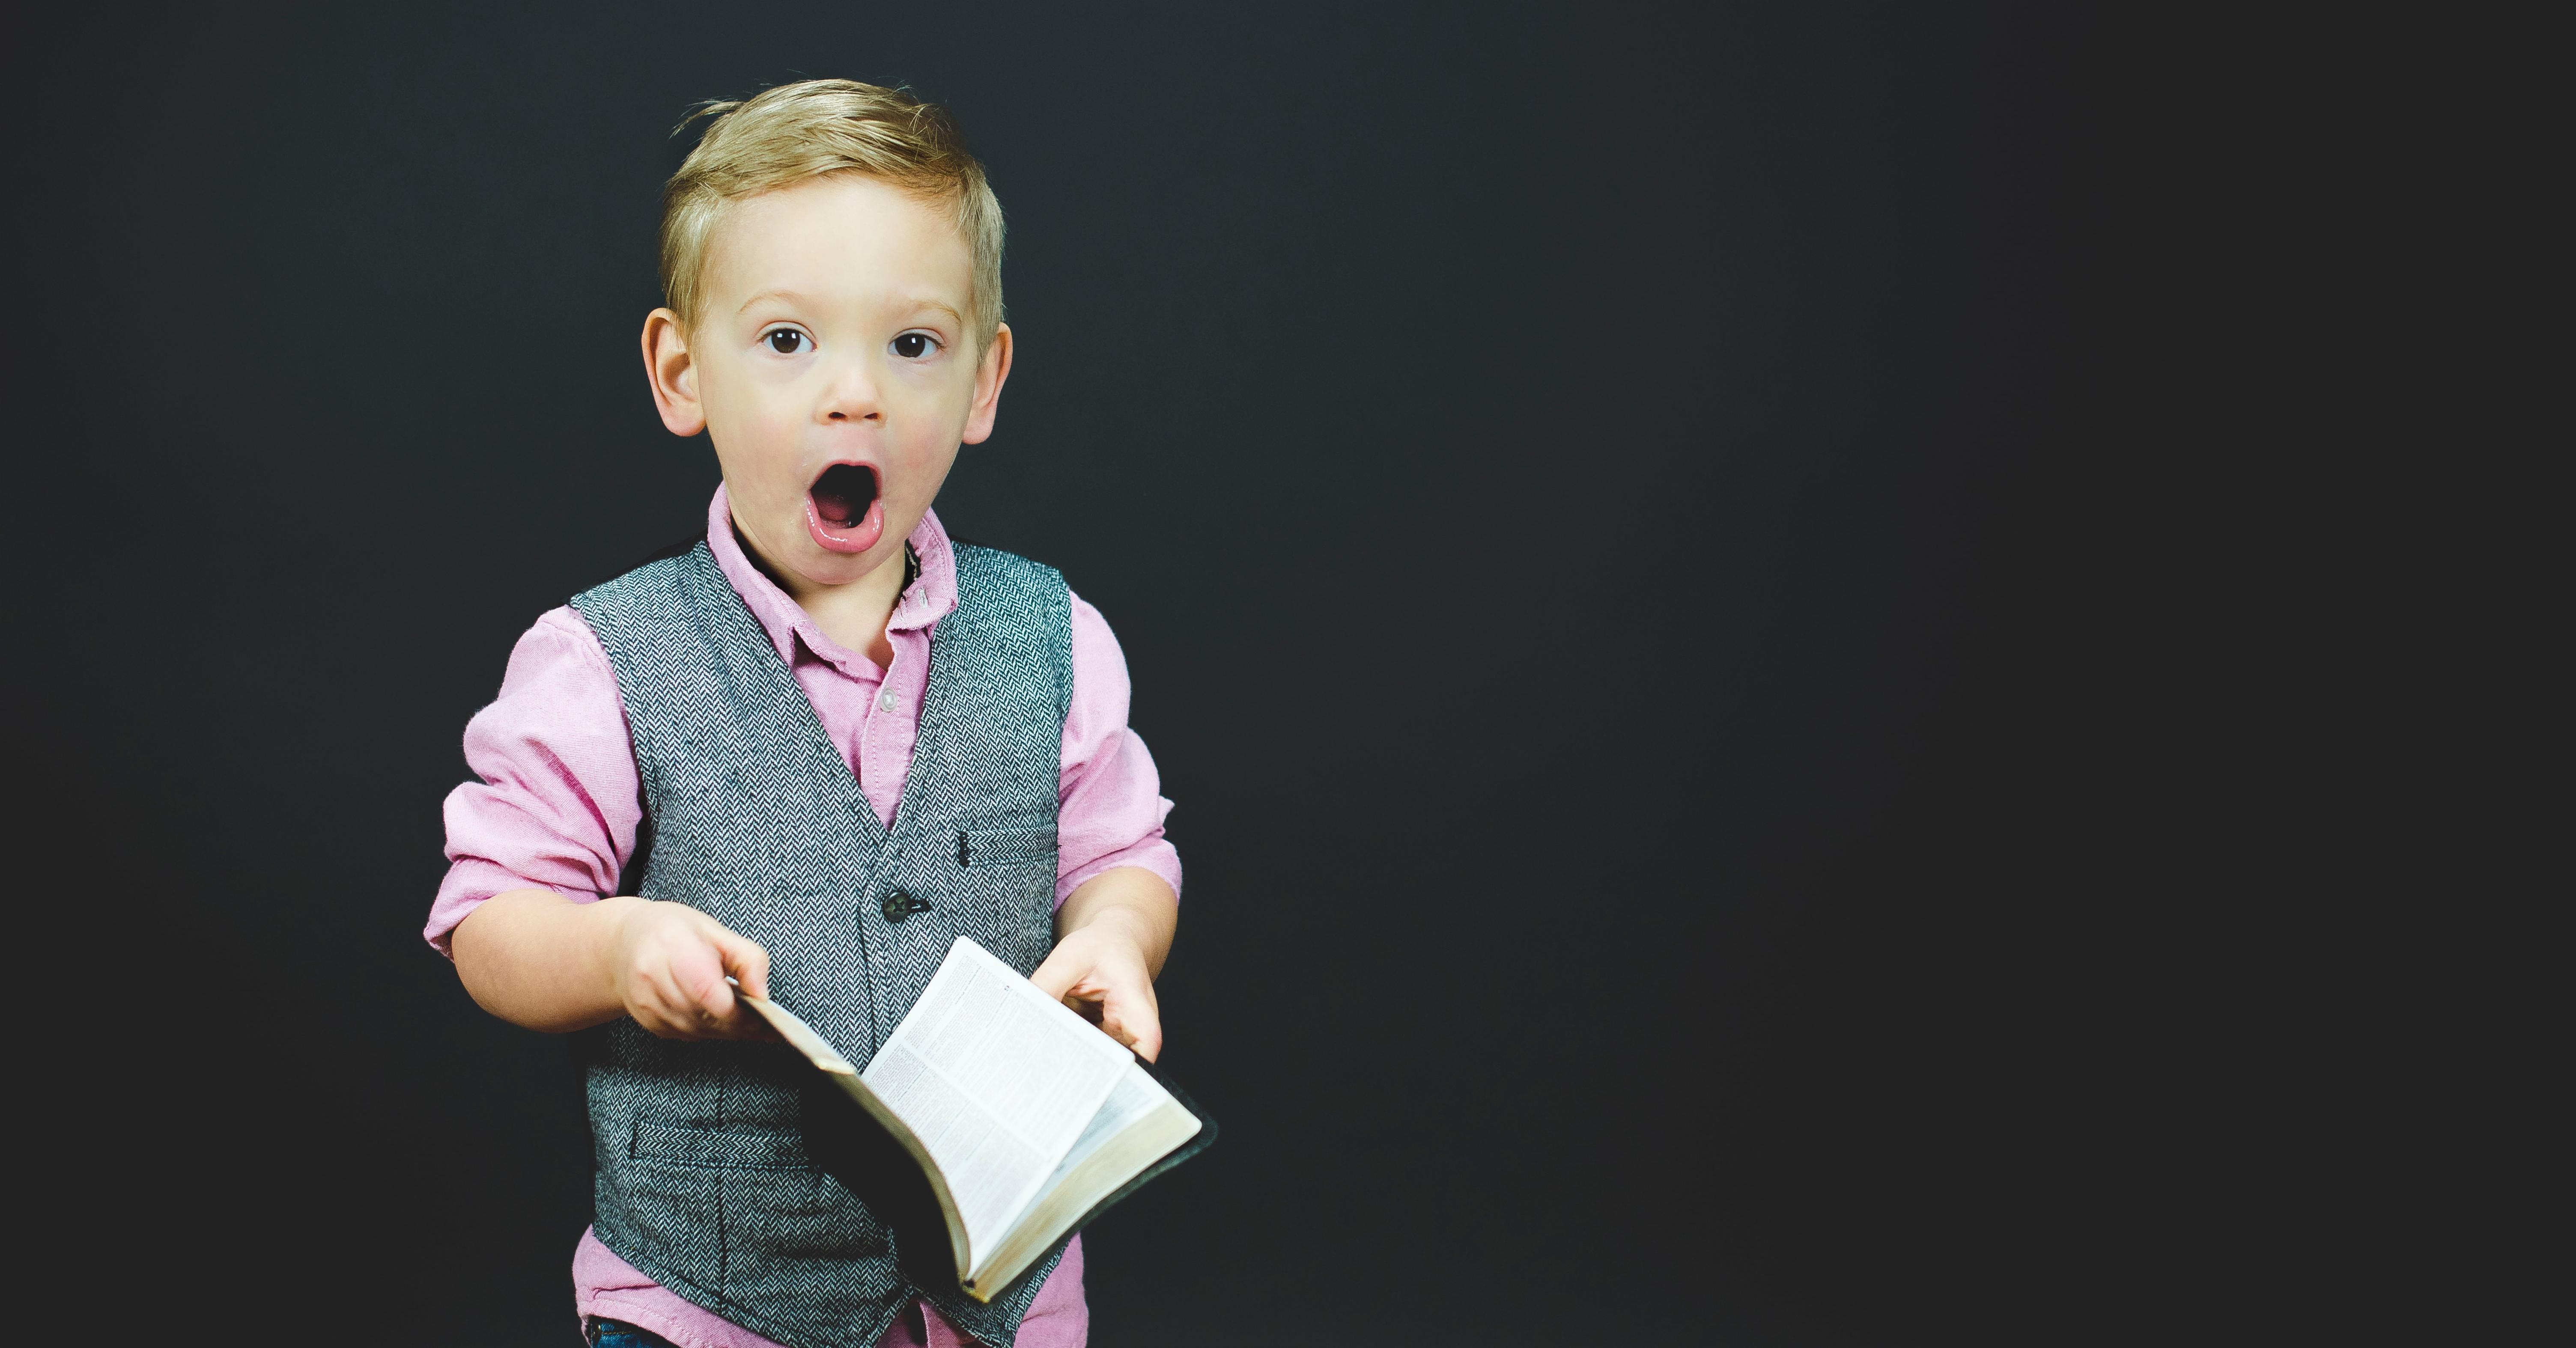 Child standing holding a book, mouth wide open dressed in a waistcoat and pink shirt